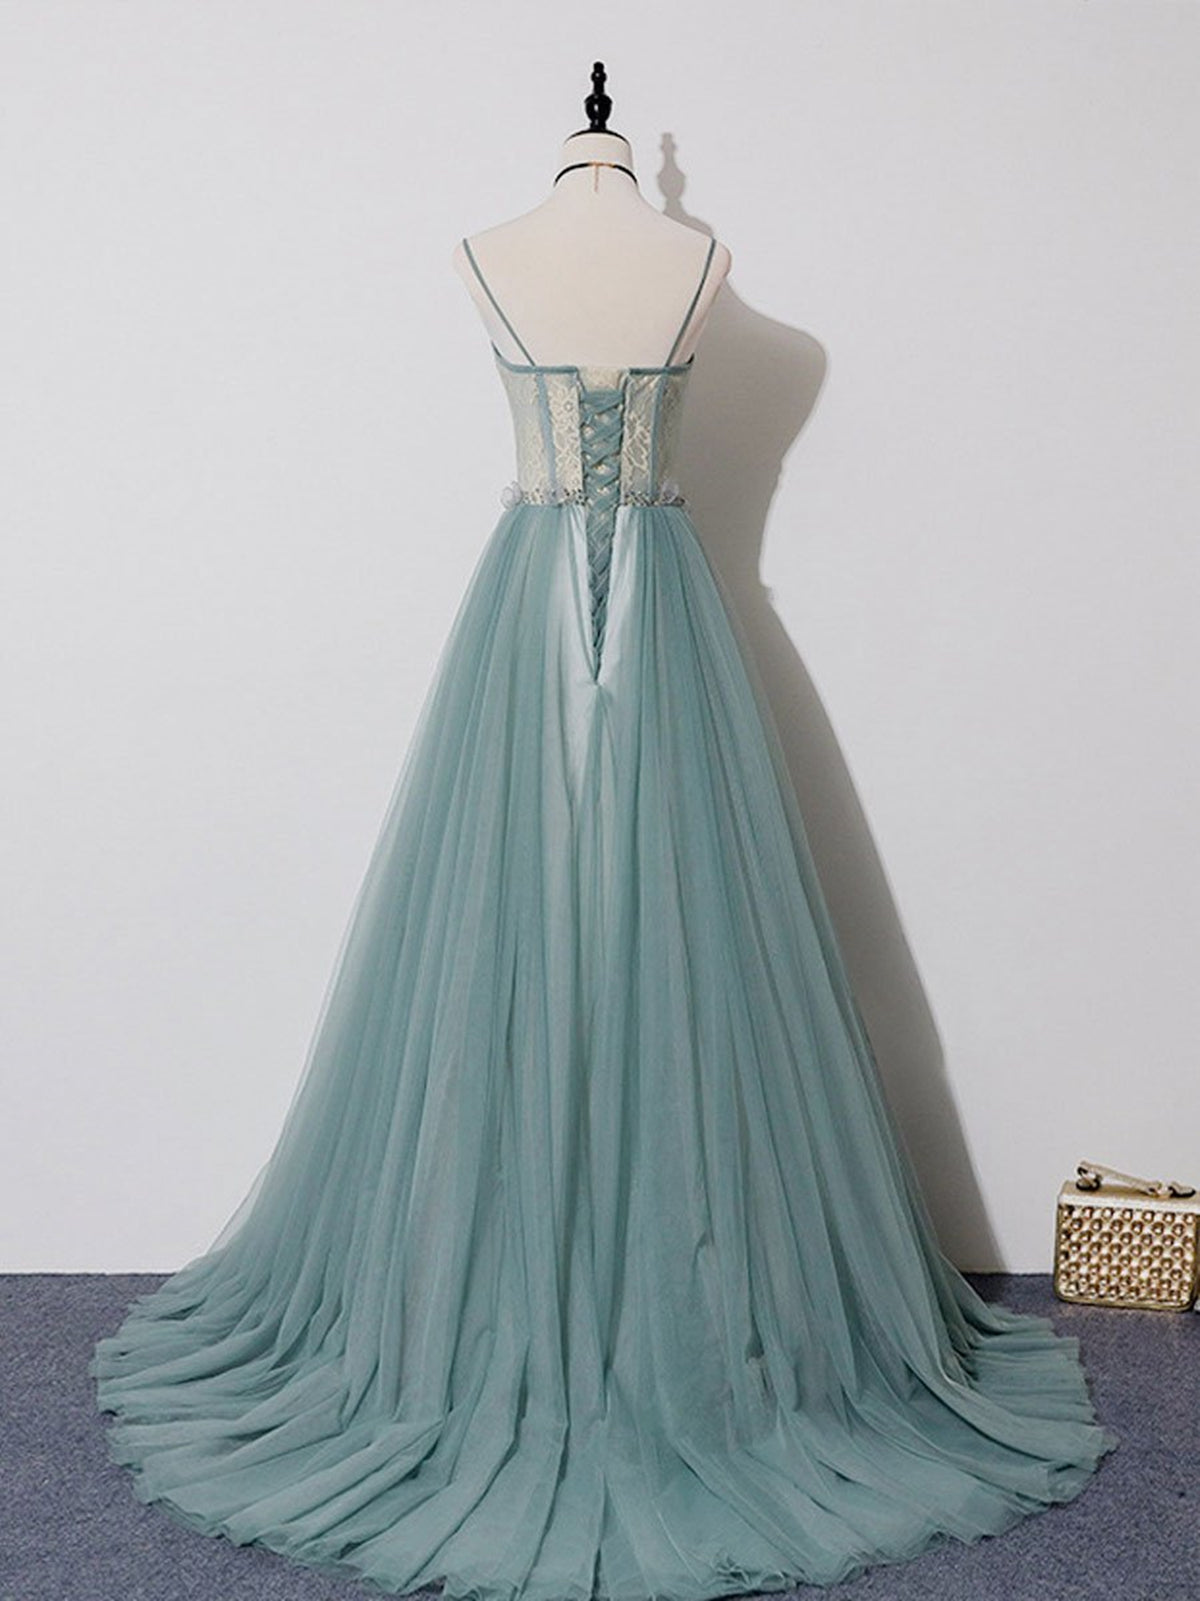 Party Dresses White, Green A Line Lace Long Prom Dresses, A Line Green Lace Long Formal Evening Dresses